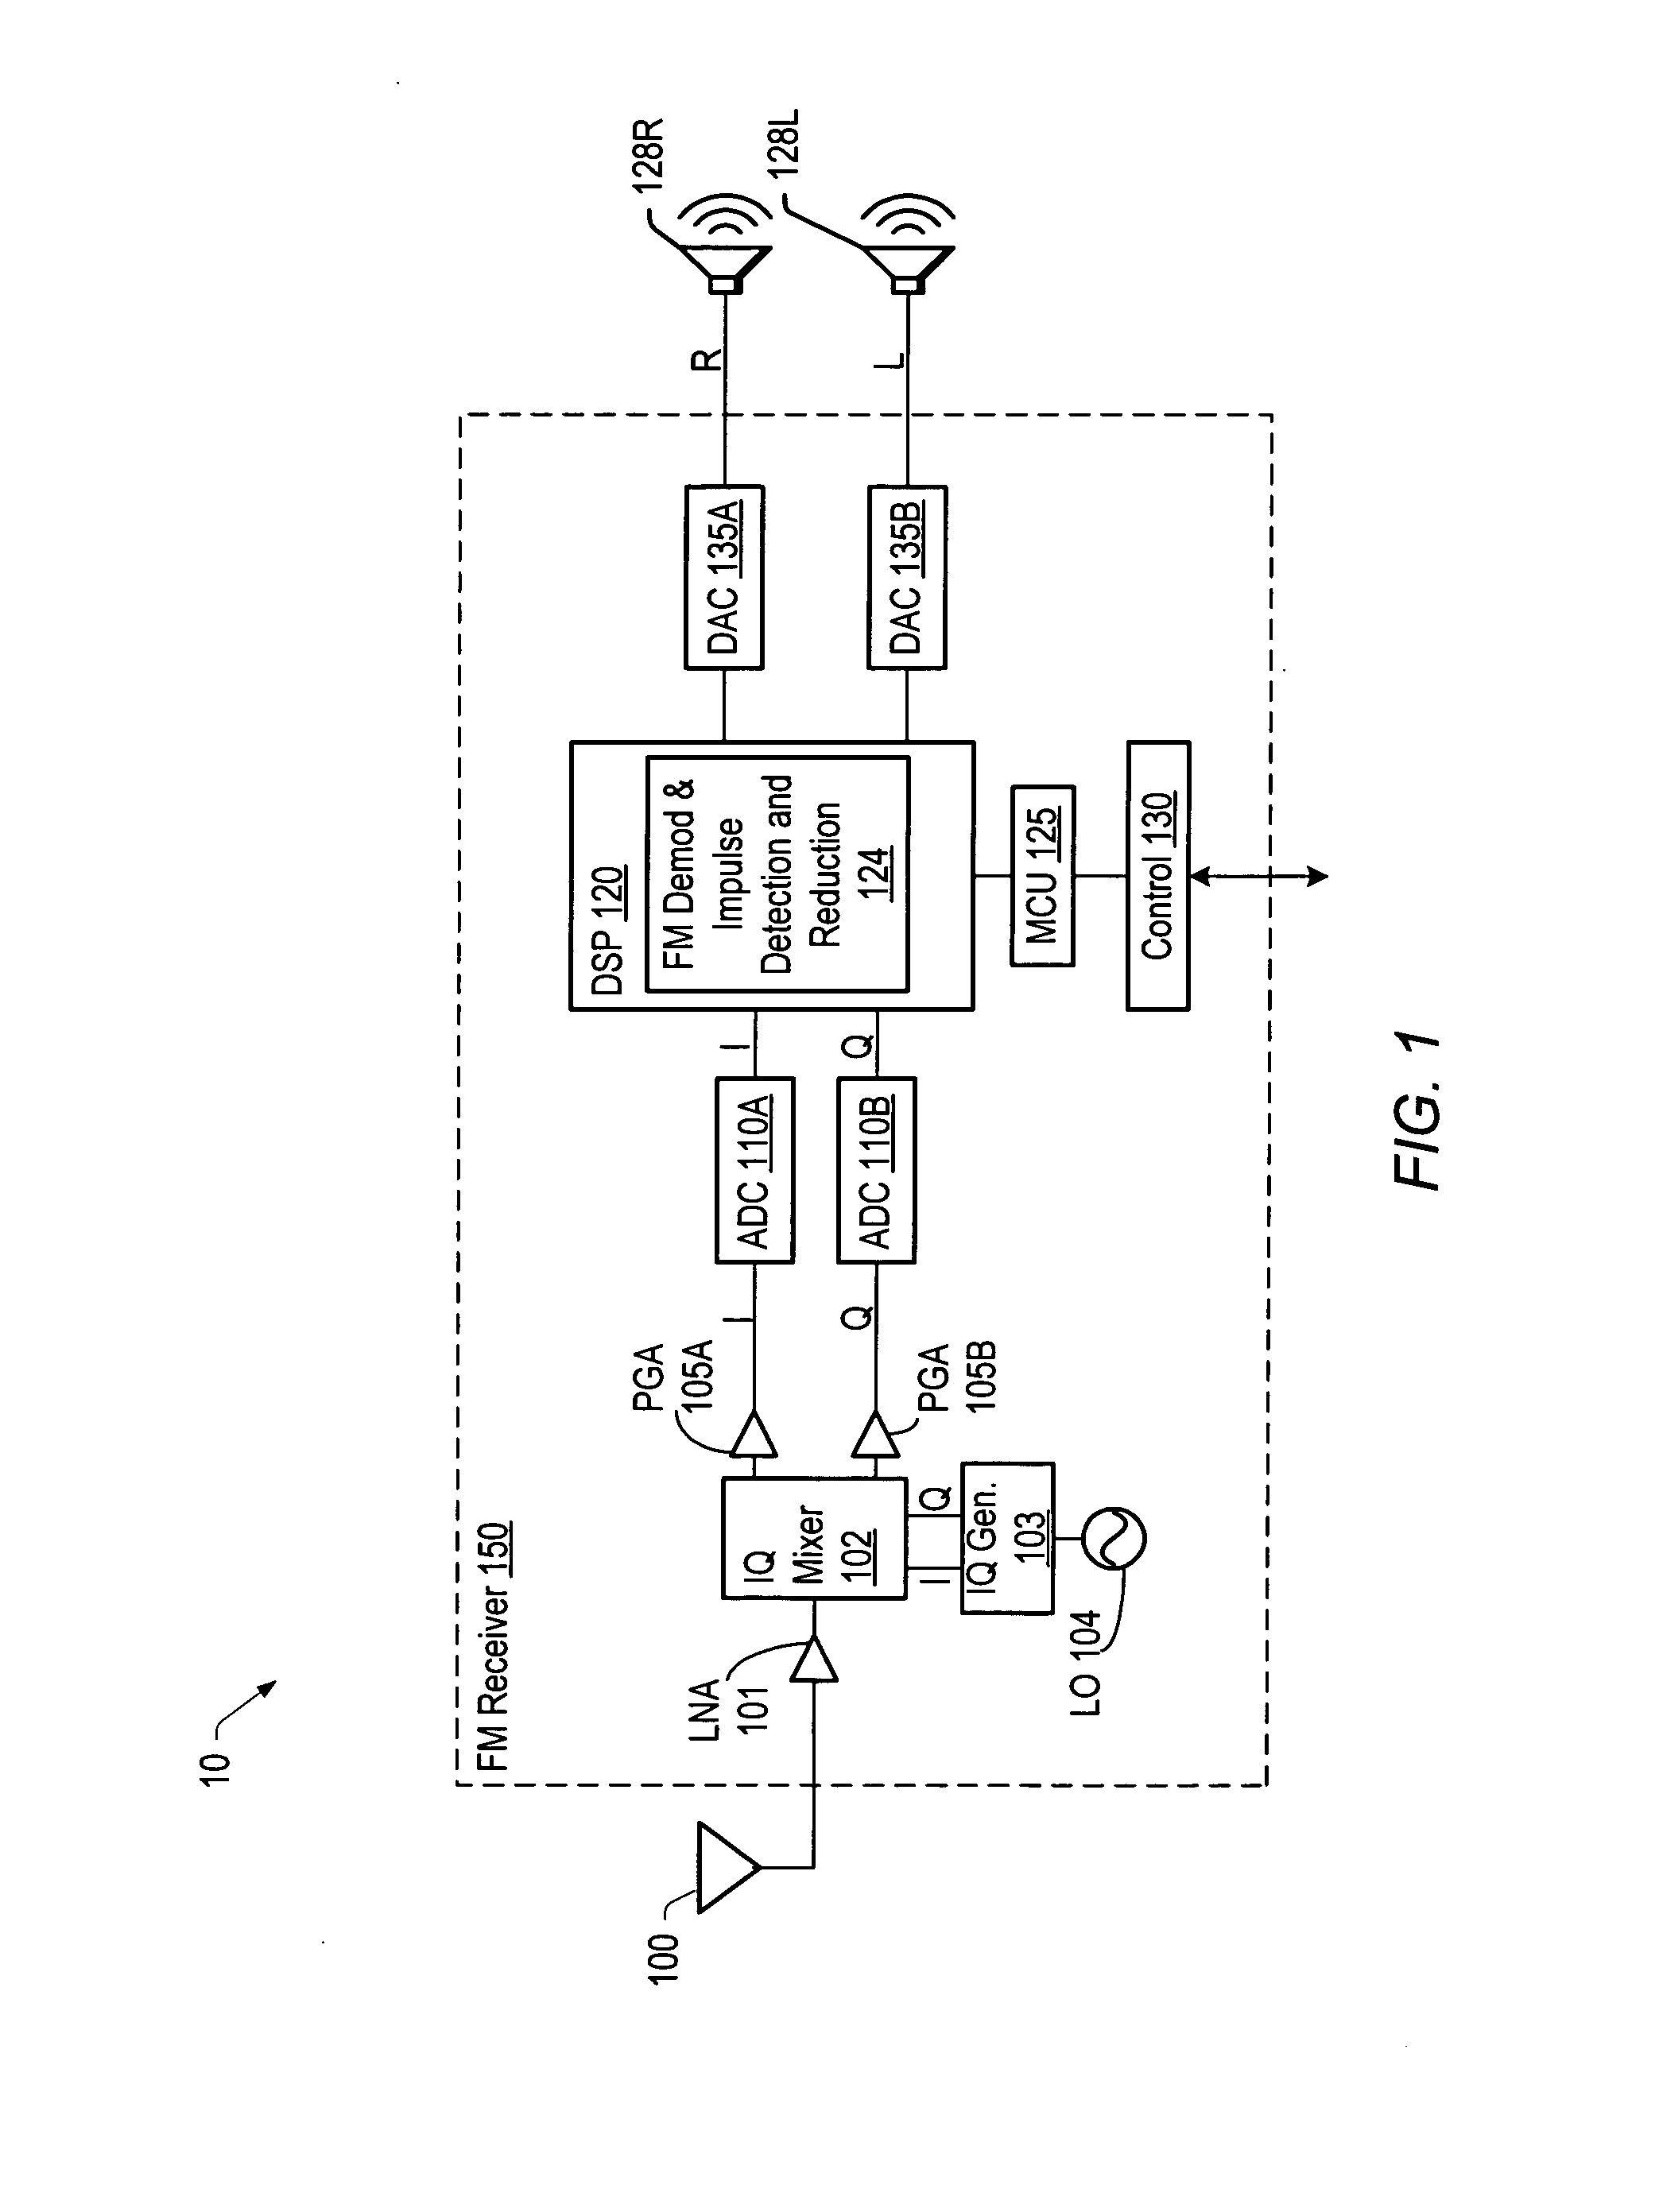 Impulse detection and reduction in a frequency modulation radio receiver